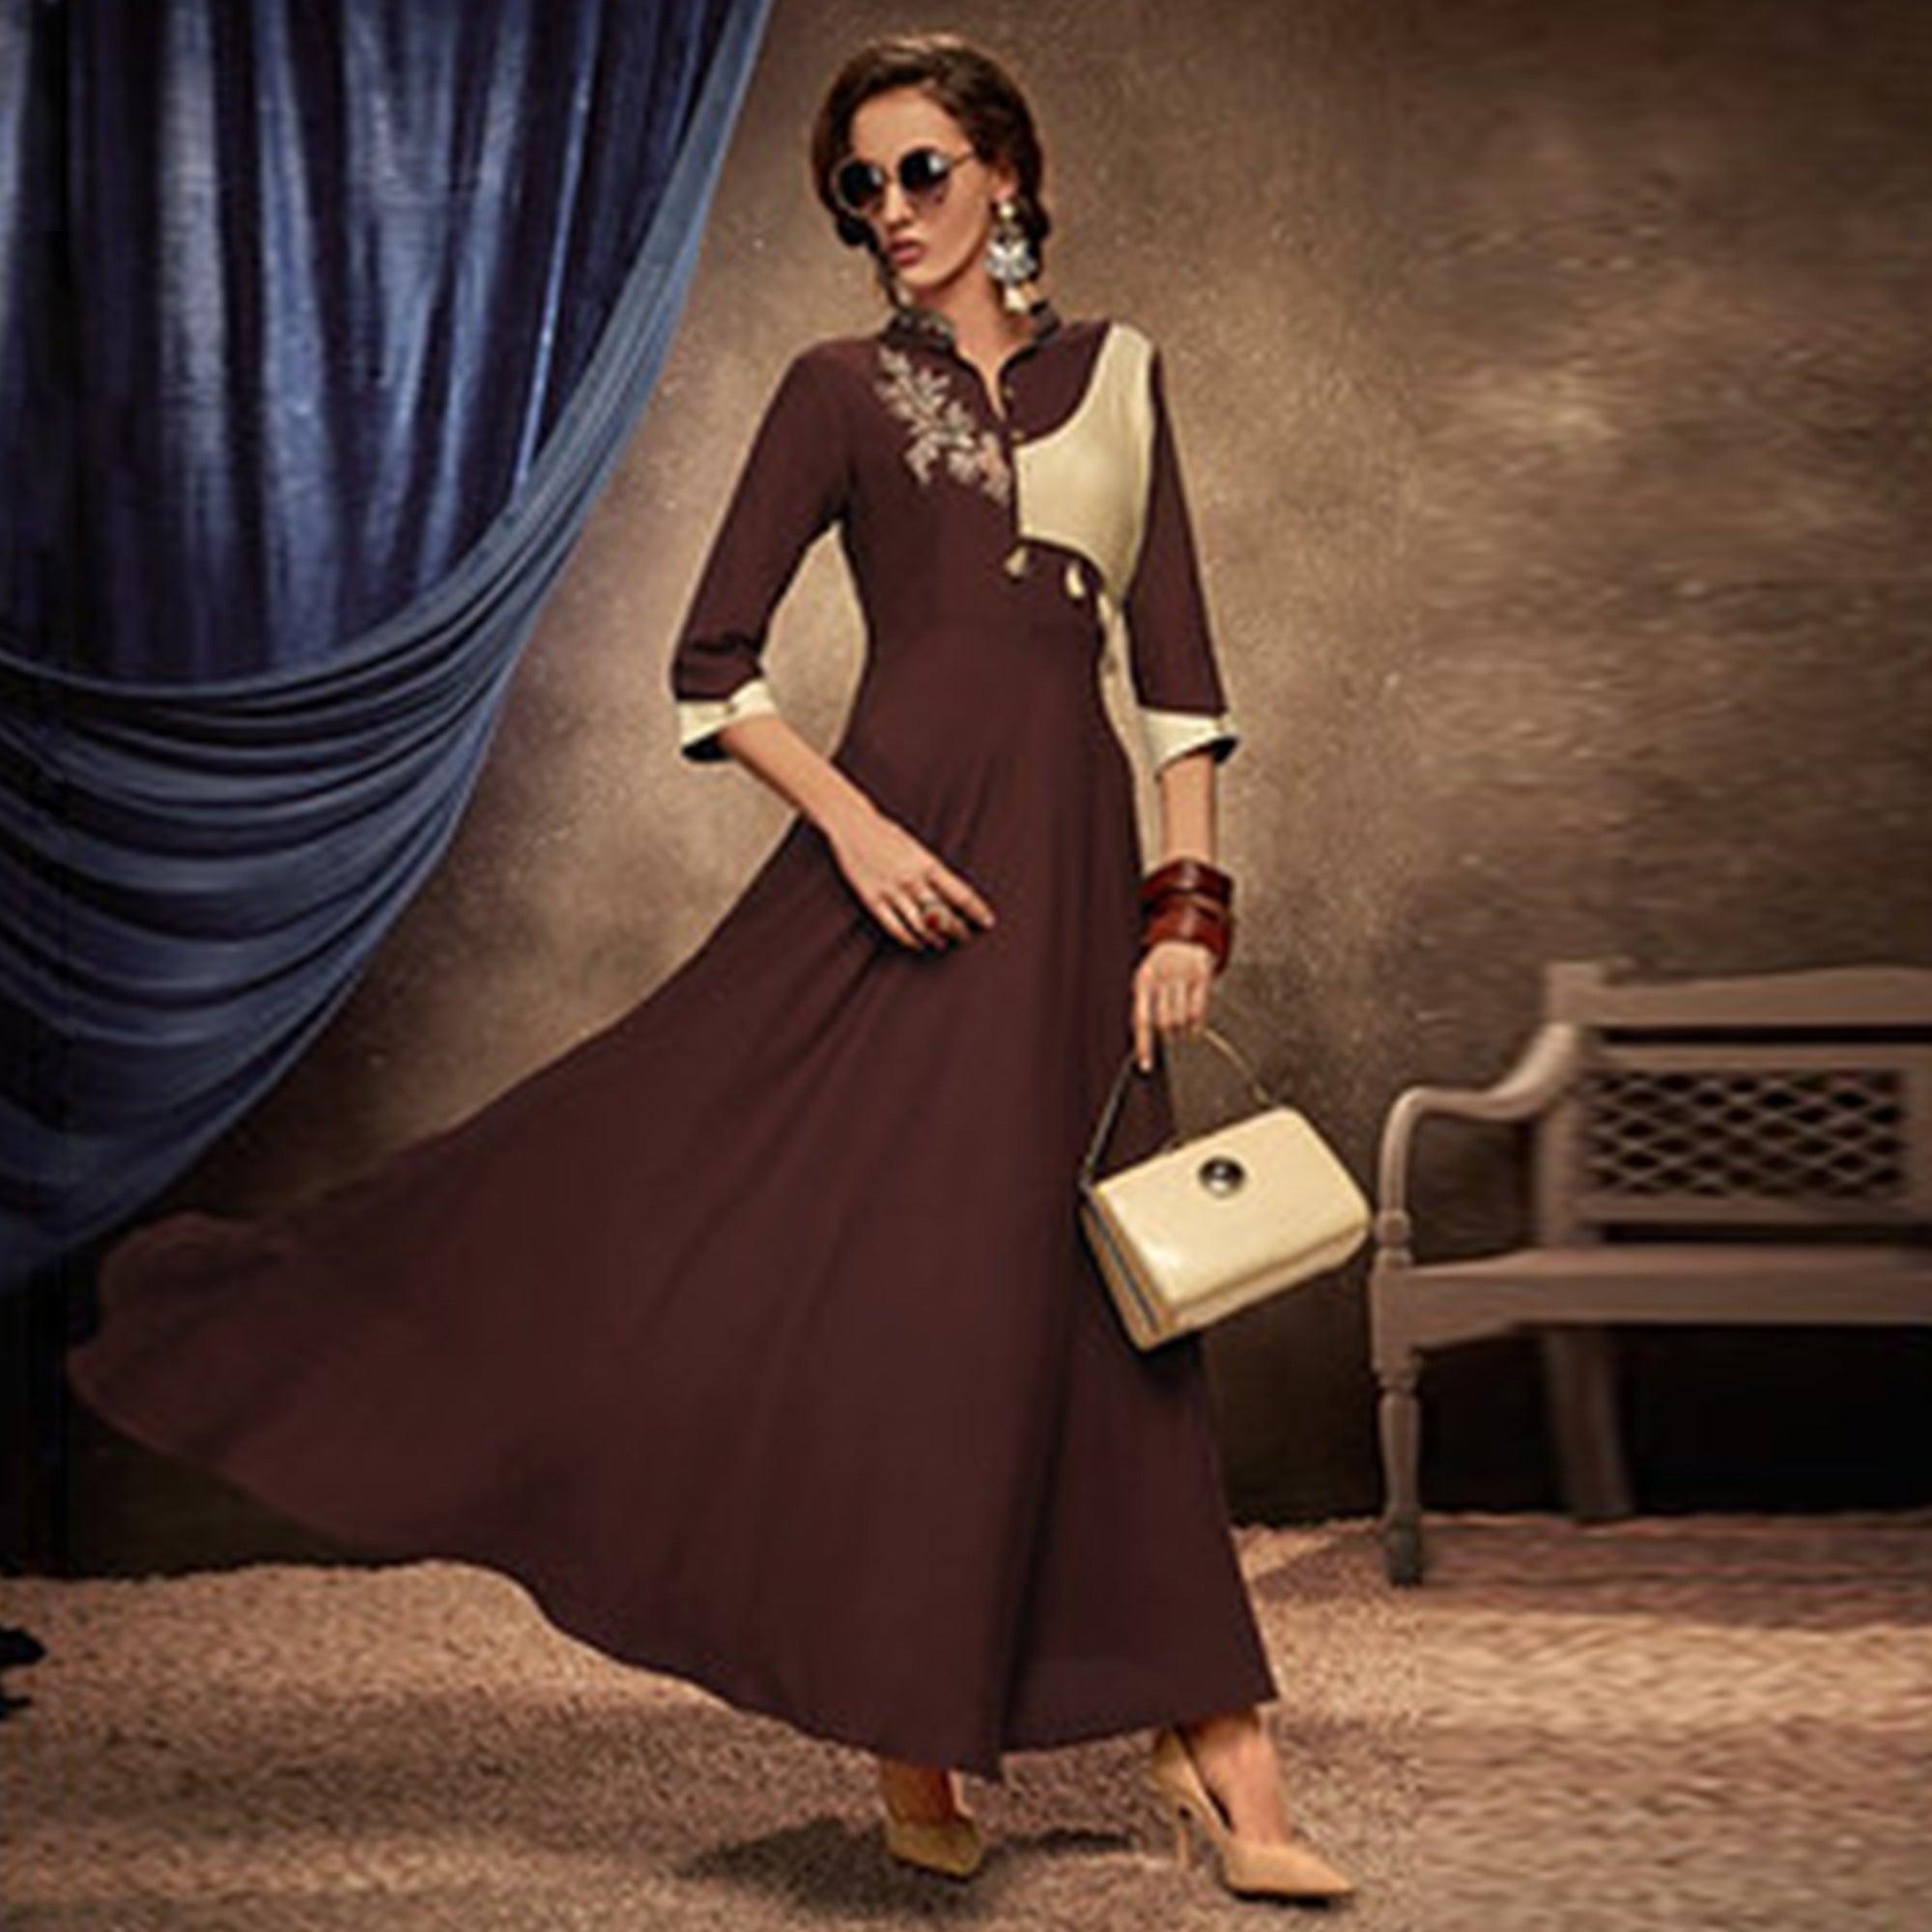 Pleasance Brown Colored Partywear Embroidered Rayon Long Kurti - Peachmode